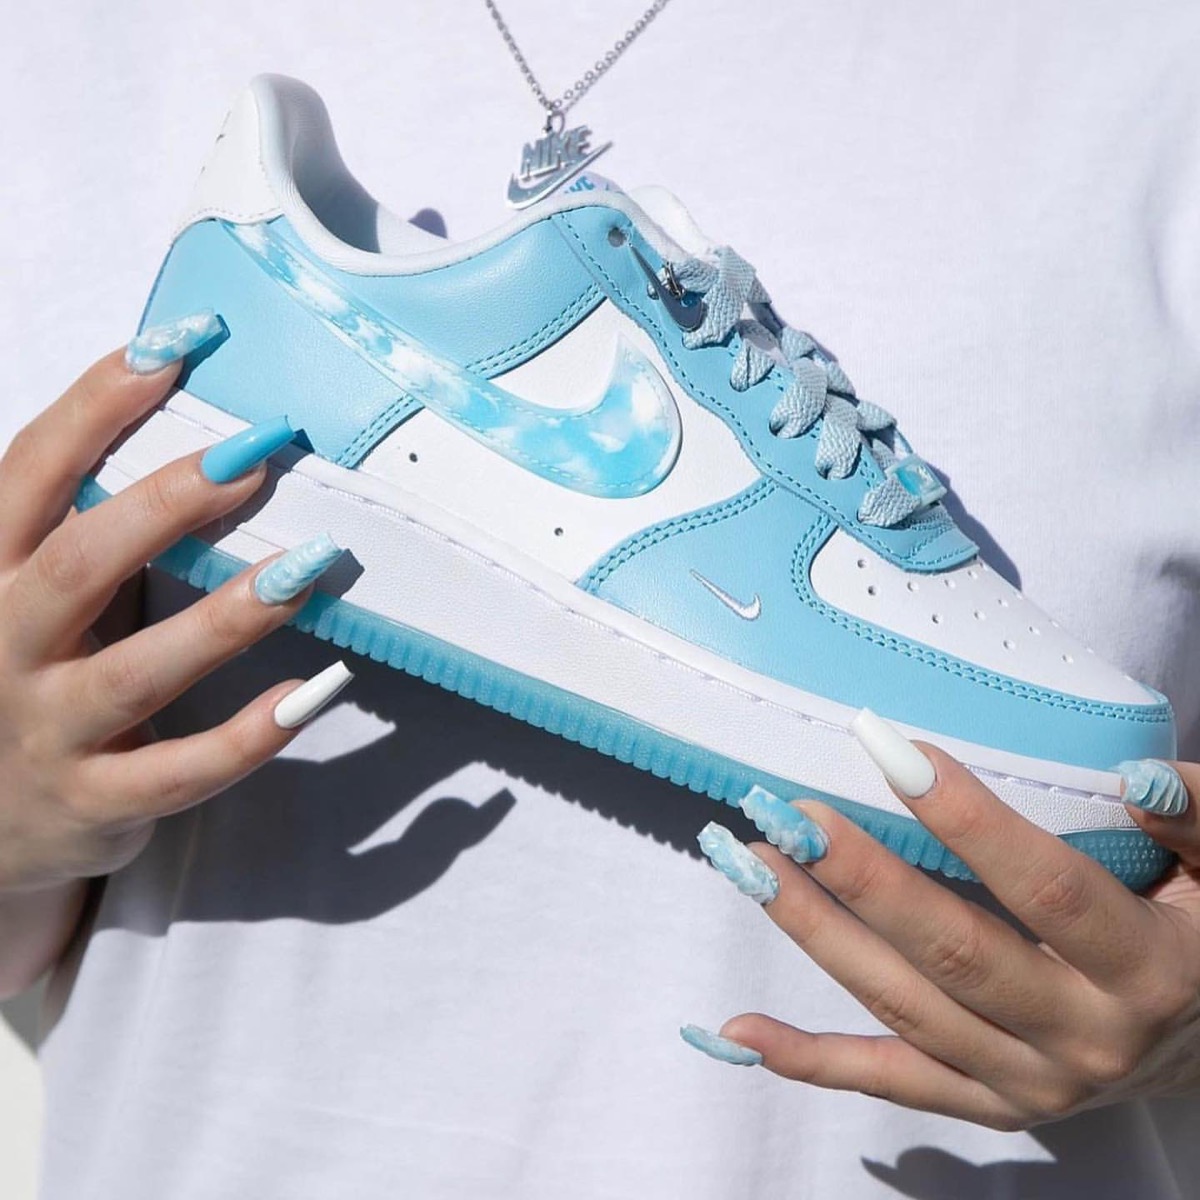 Nike Wmns Air Force '07 LX “Celestine Blue”が国内9月8日に発売予定 UP TO DATE